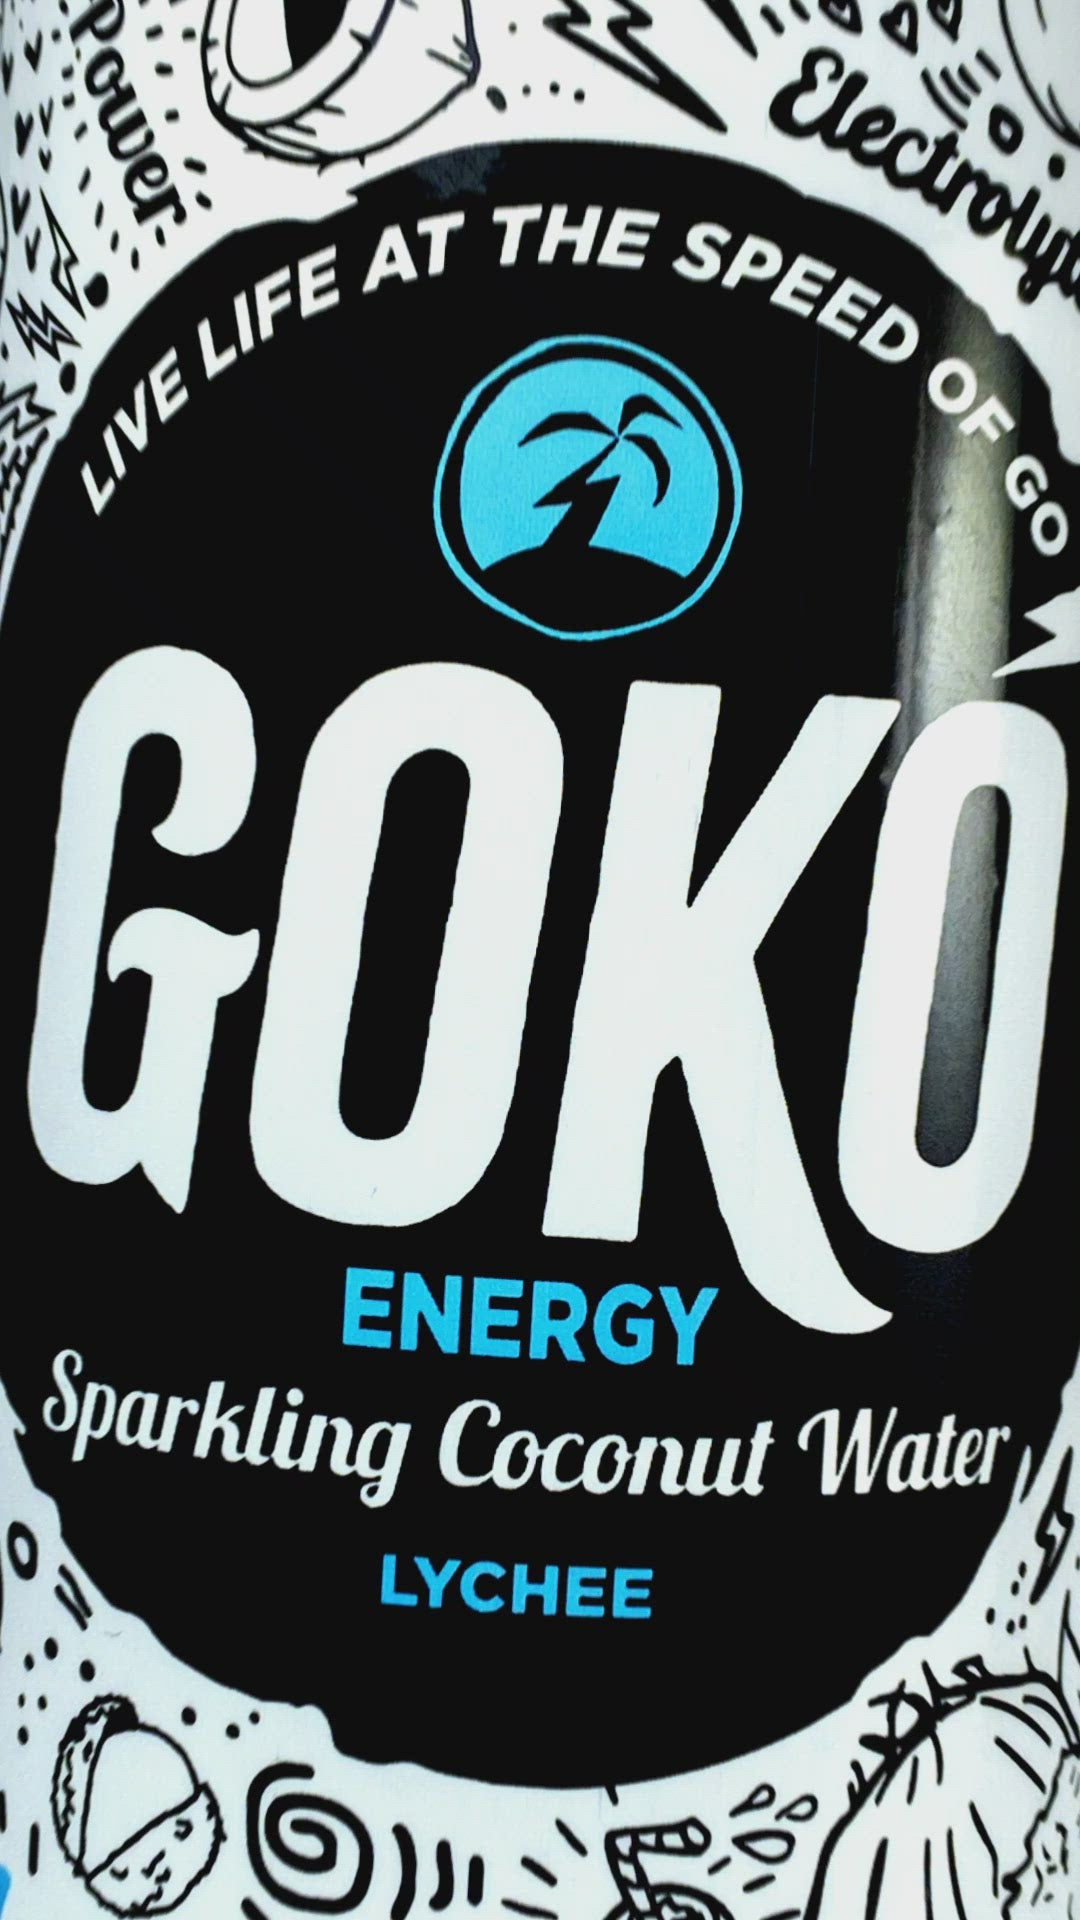 All Natural Sparkling Coconut Water - GoKo Lychee